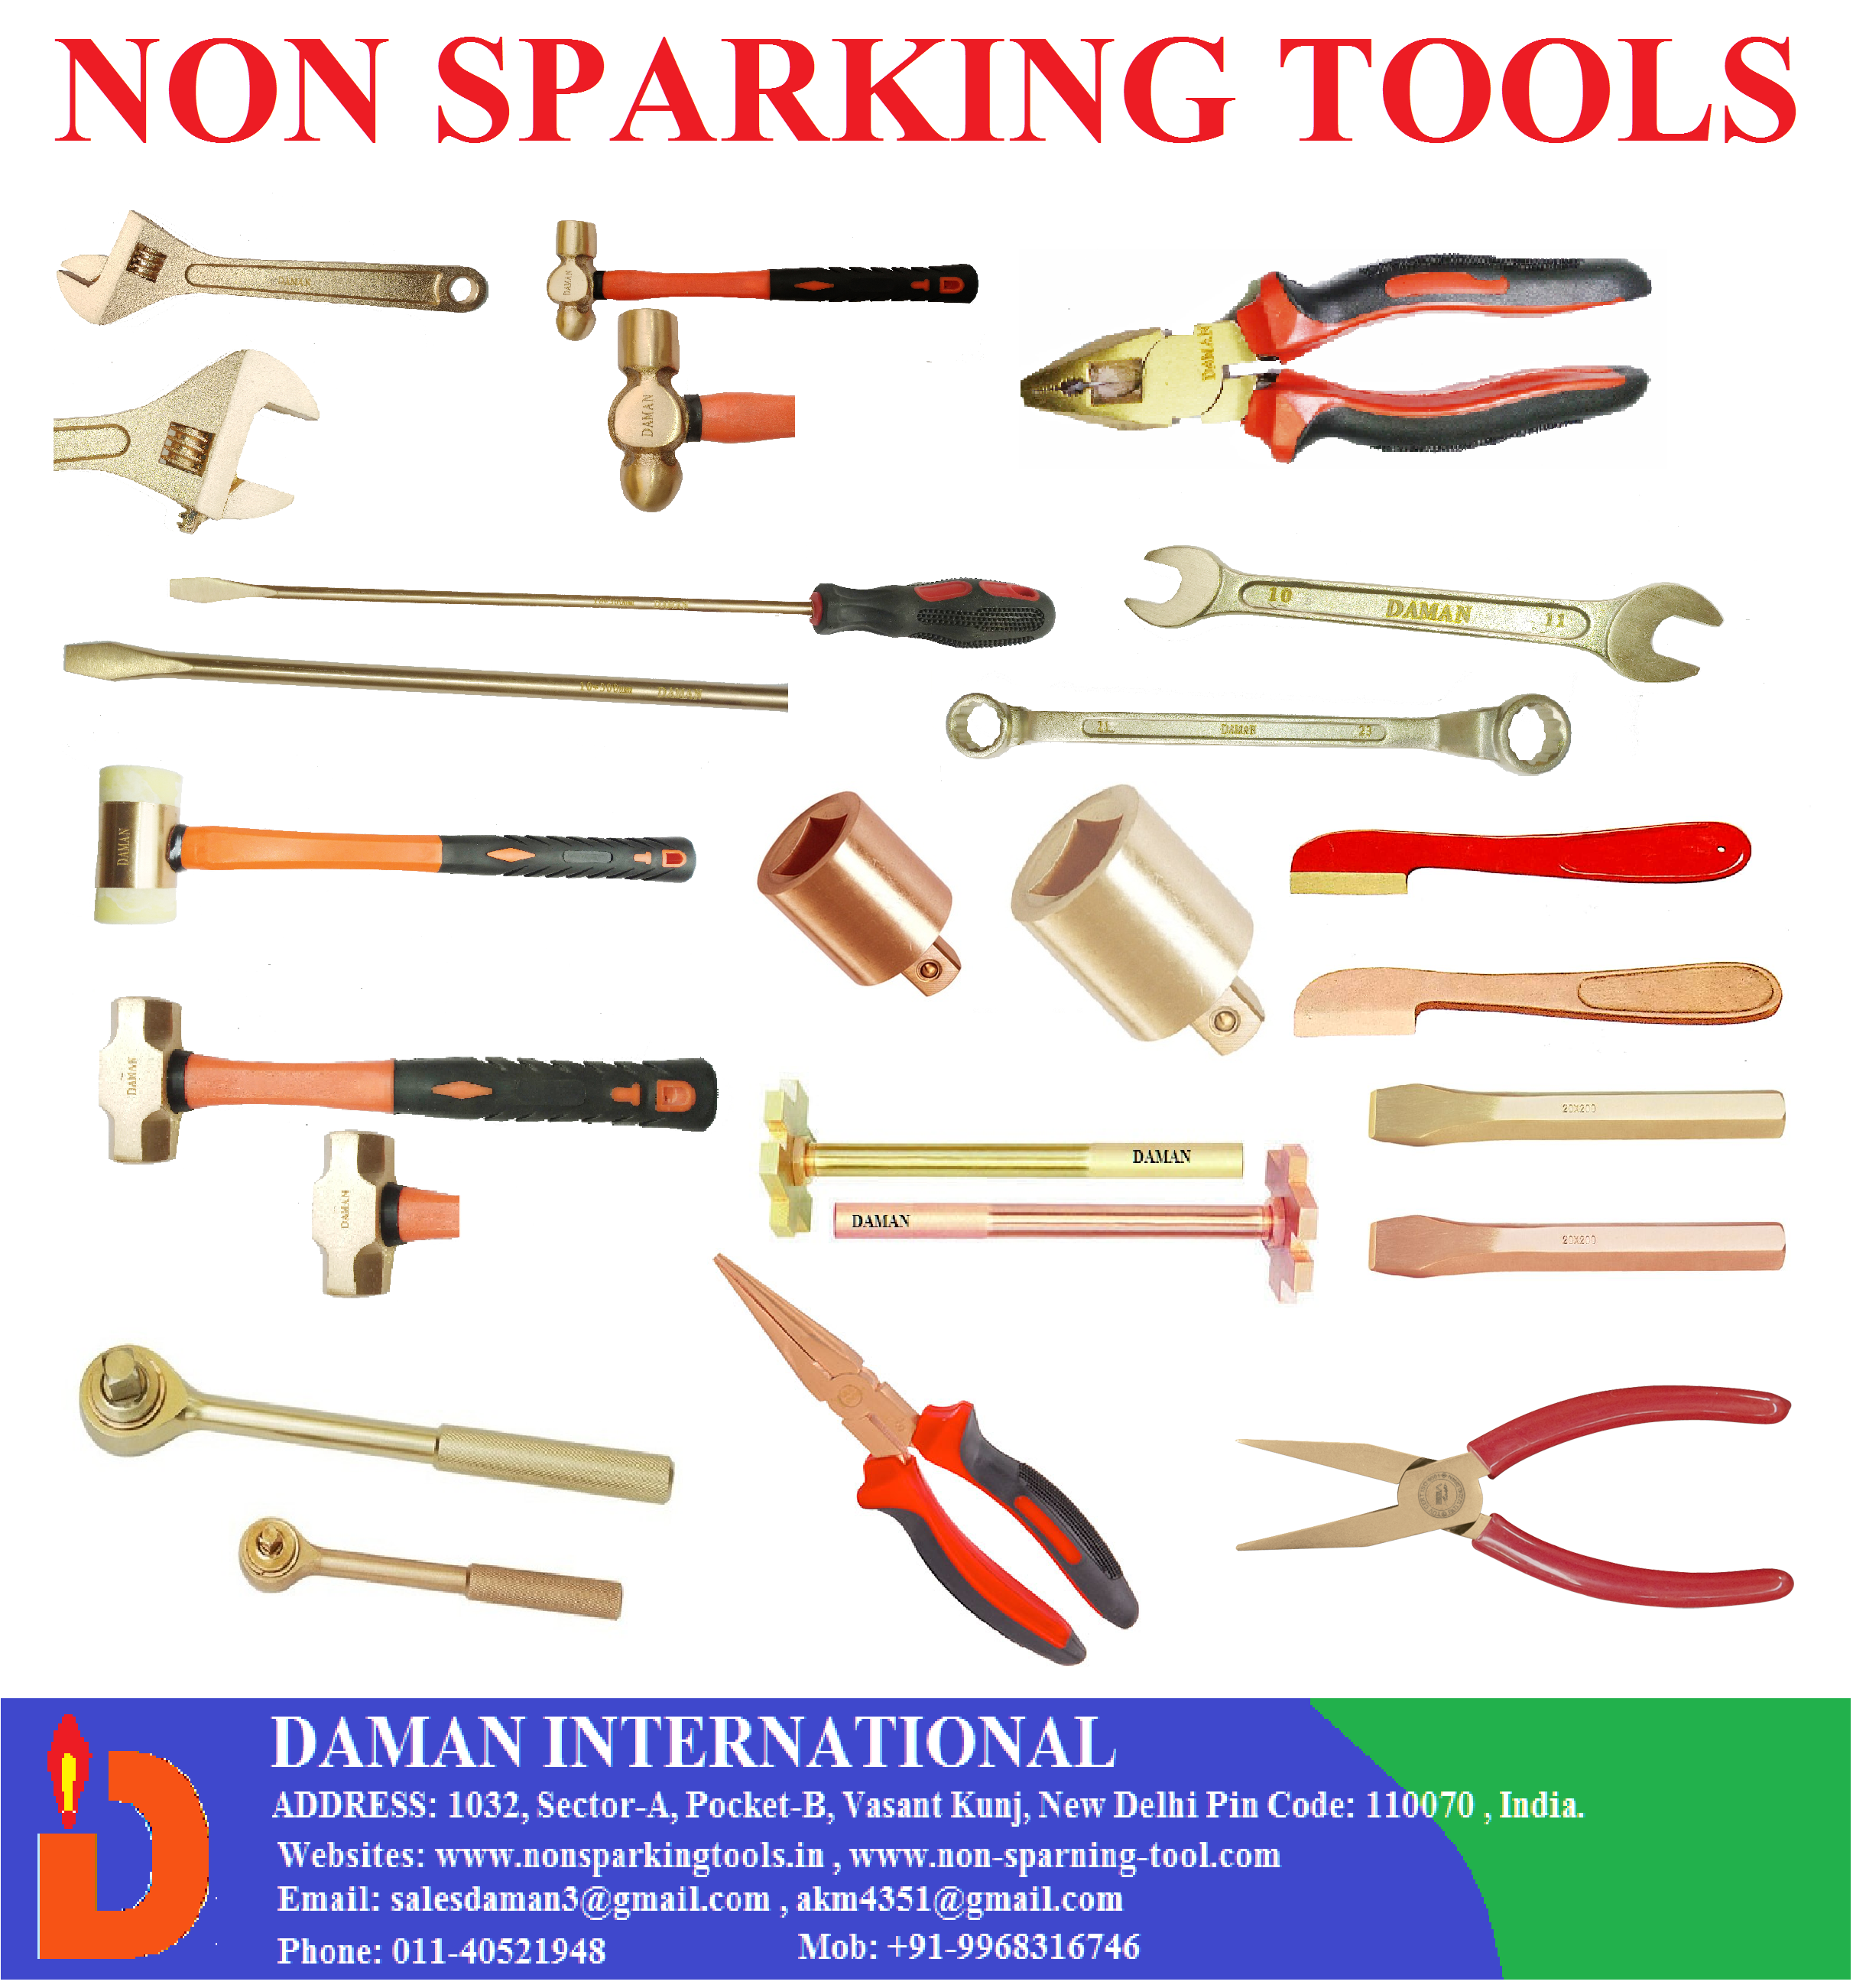 Spark tools. Инструмент Spark. Non Spark Tools Aviation. Die Tools Manufacturing.